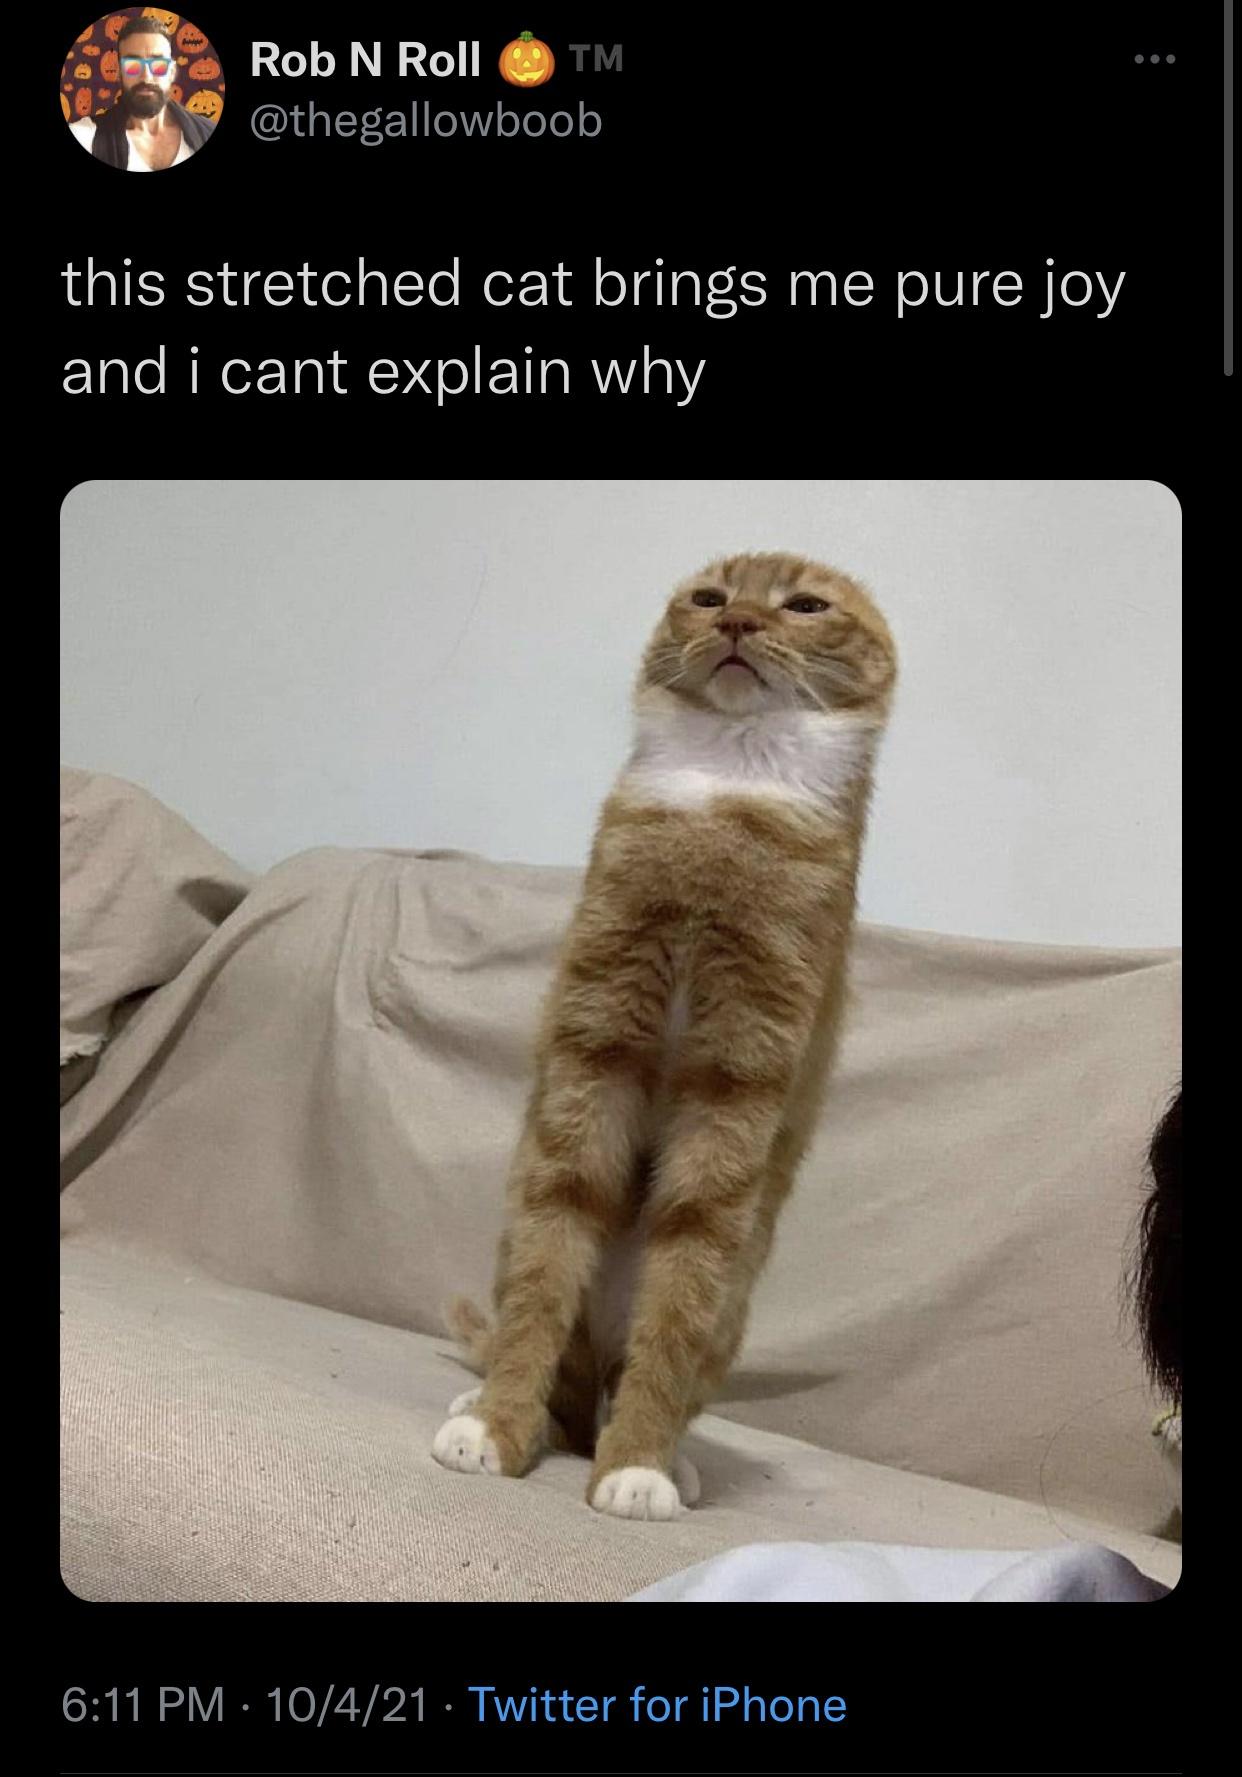 funny memes - hilarious memes - cat - Rob N Roll Tm this stretched cat brings me pure joy and i cant explain why 10421 Twitter for iPhone